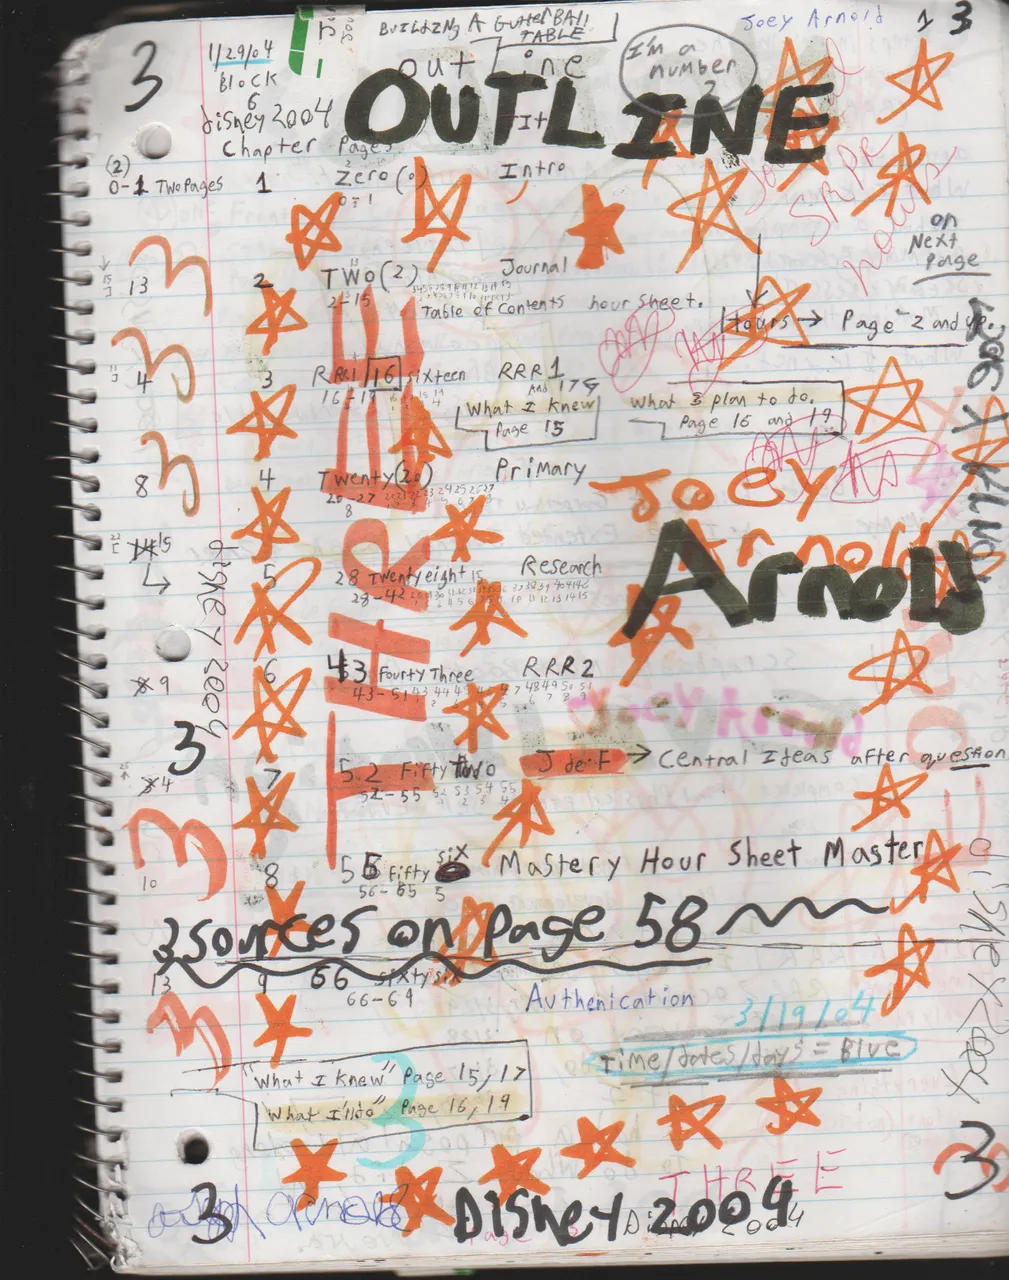 2004-01-29 - Thursday - Carpetball FGHS Senior Project Journal, Joey Arnold, Part 01, Notebook-5.png